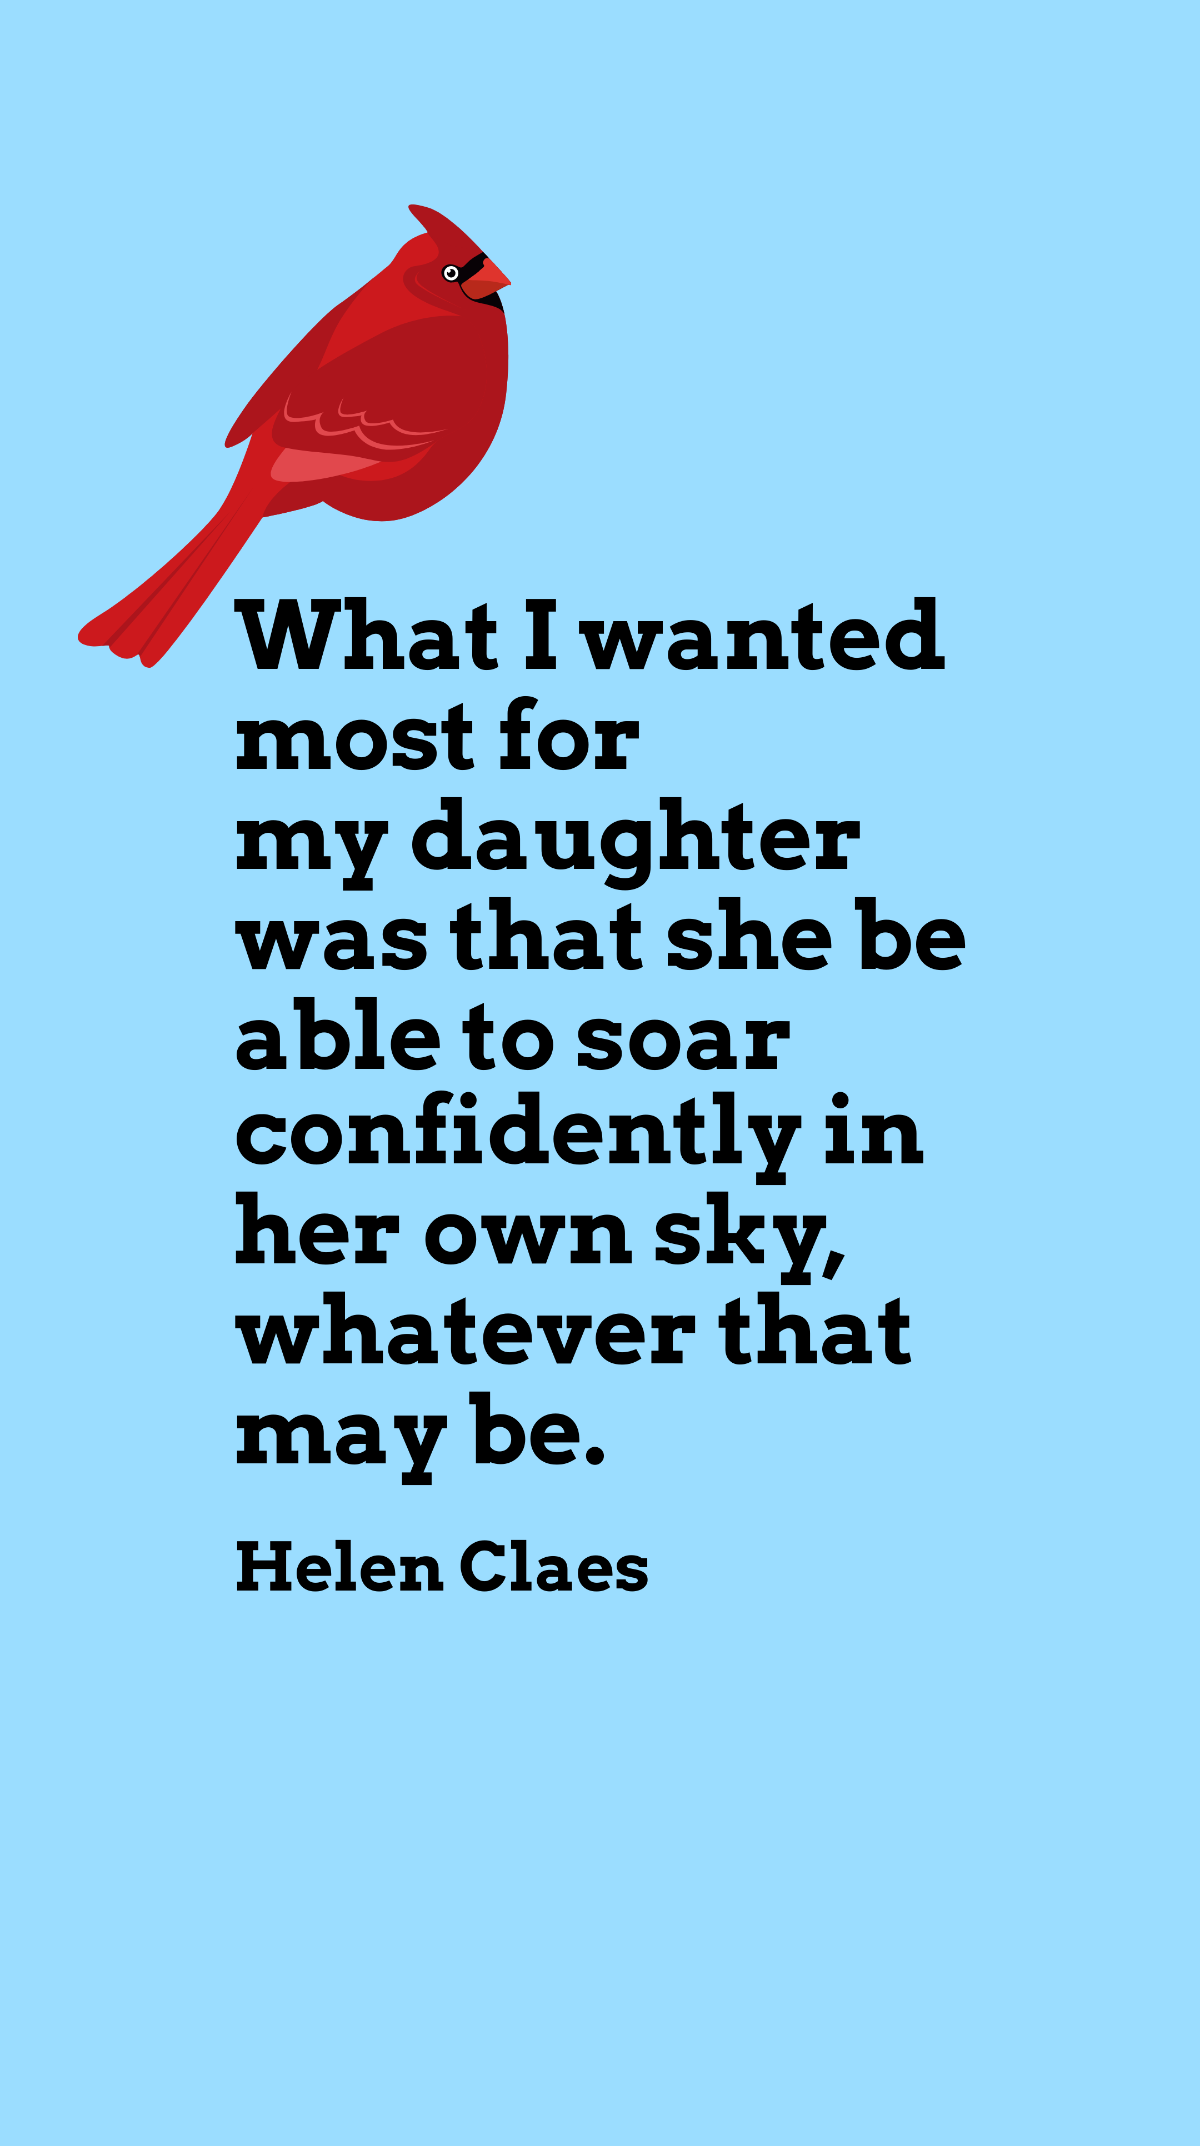 Free Helen Claes - What I wanted most for my daughter was that she be able to soar confidently in her own sky, whatever that may be. Template